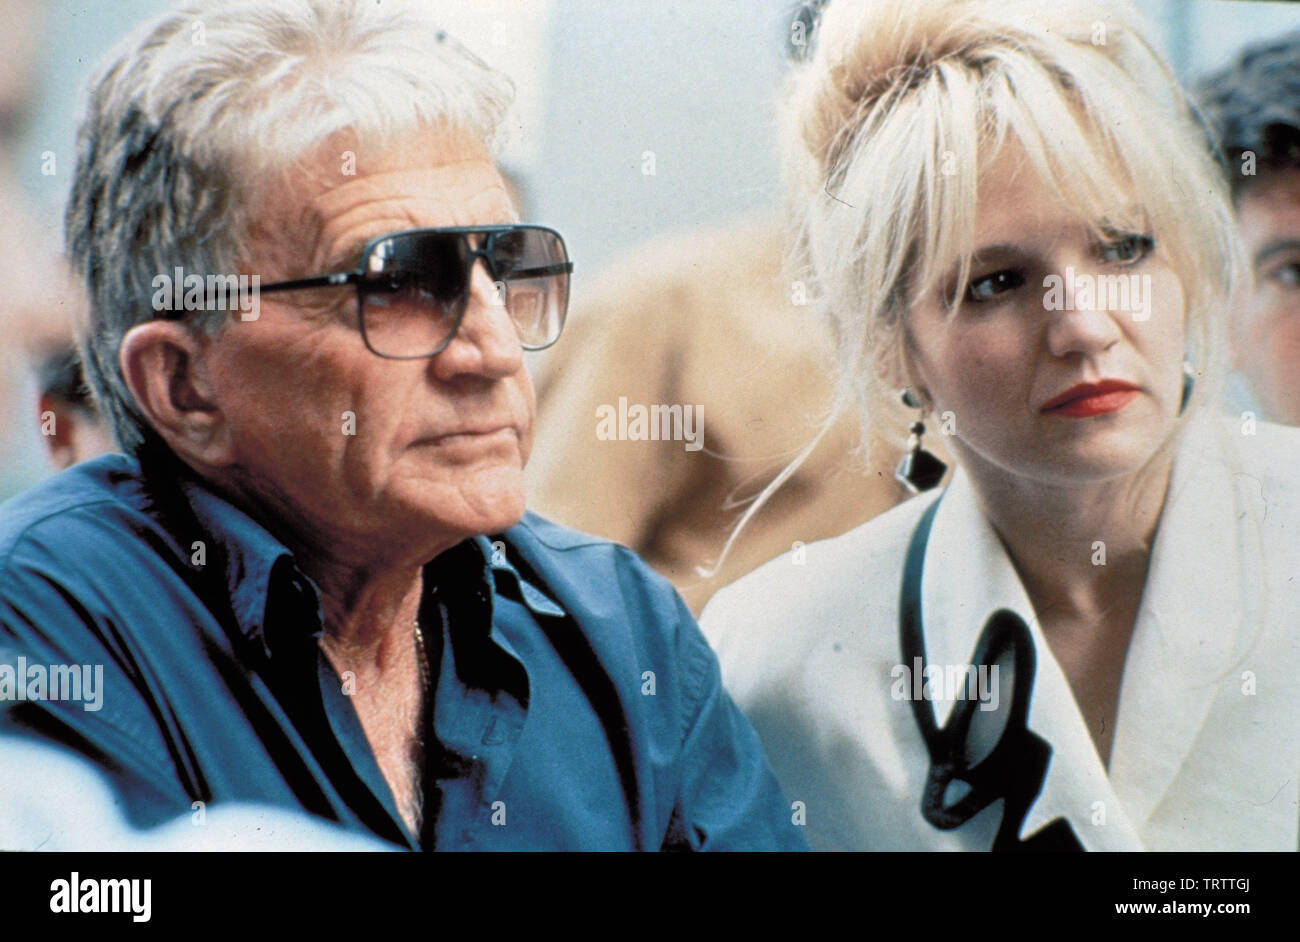 BLAKE EDWARDS and ELLEN BARKIN in SWITCH (1991). Copyright: Editorial use  only. No merchandising or book covers. This is a publicly distributed  handout. Access rights only, no license of copyright provided. Only